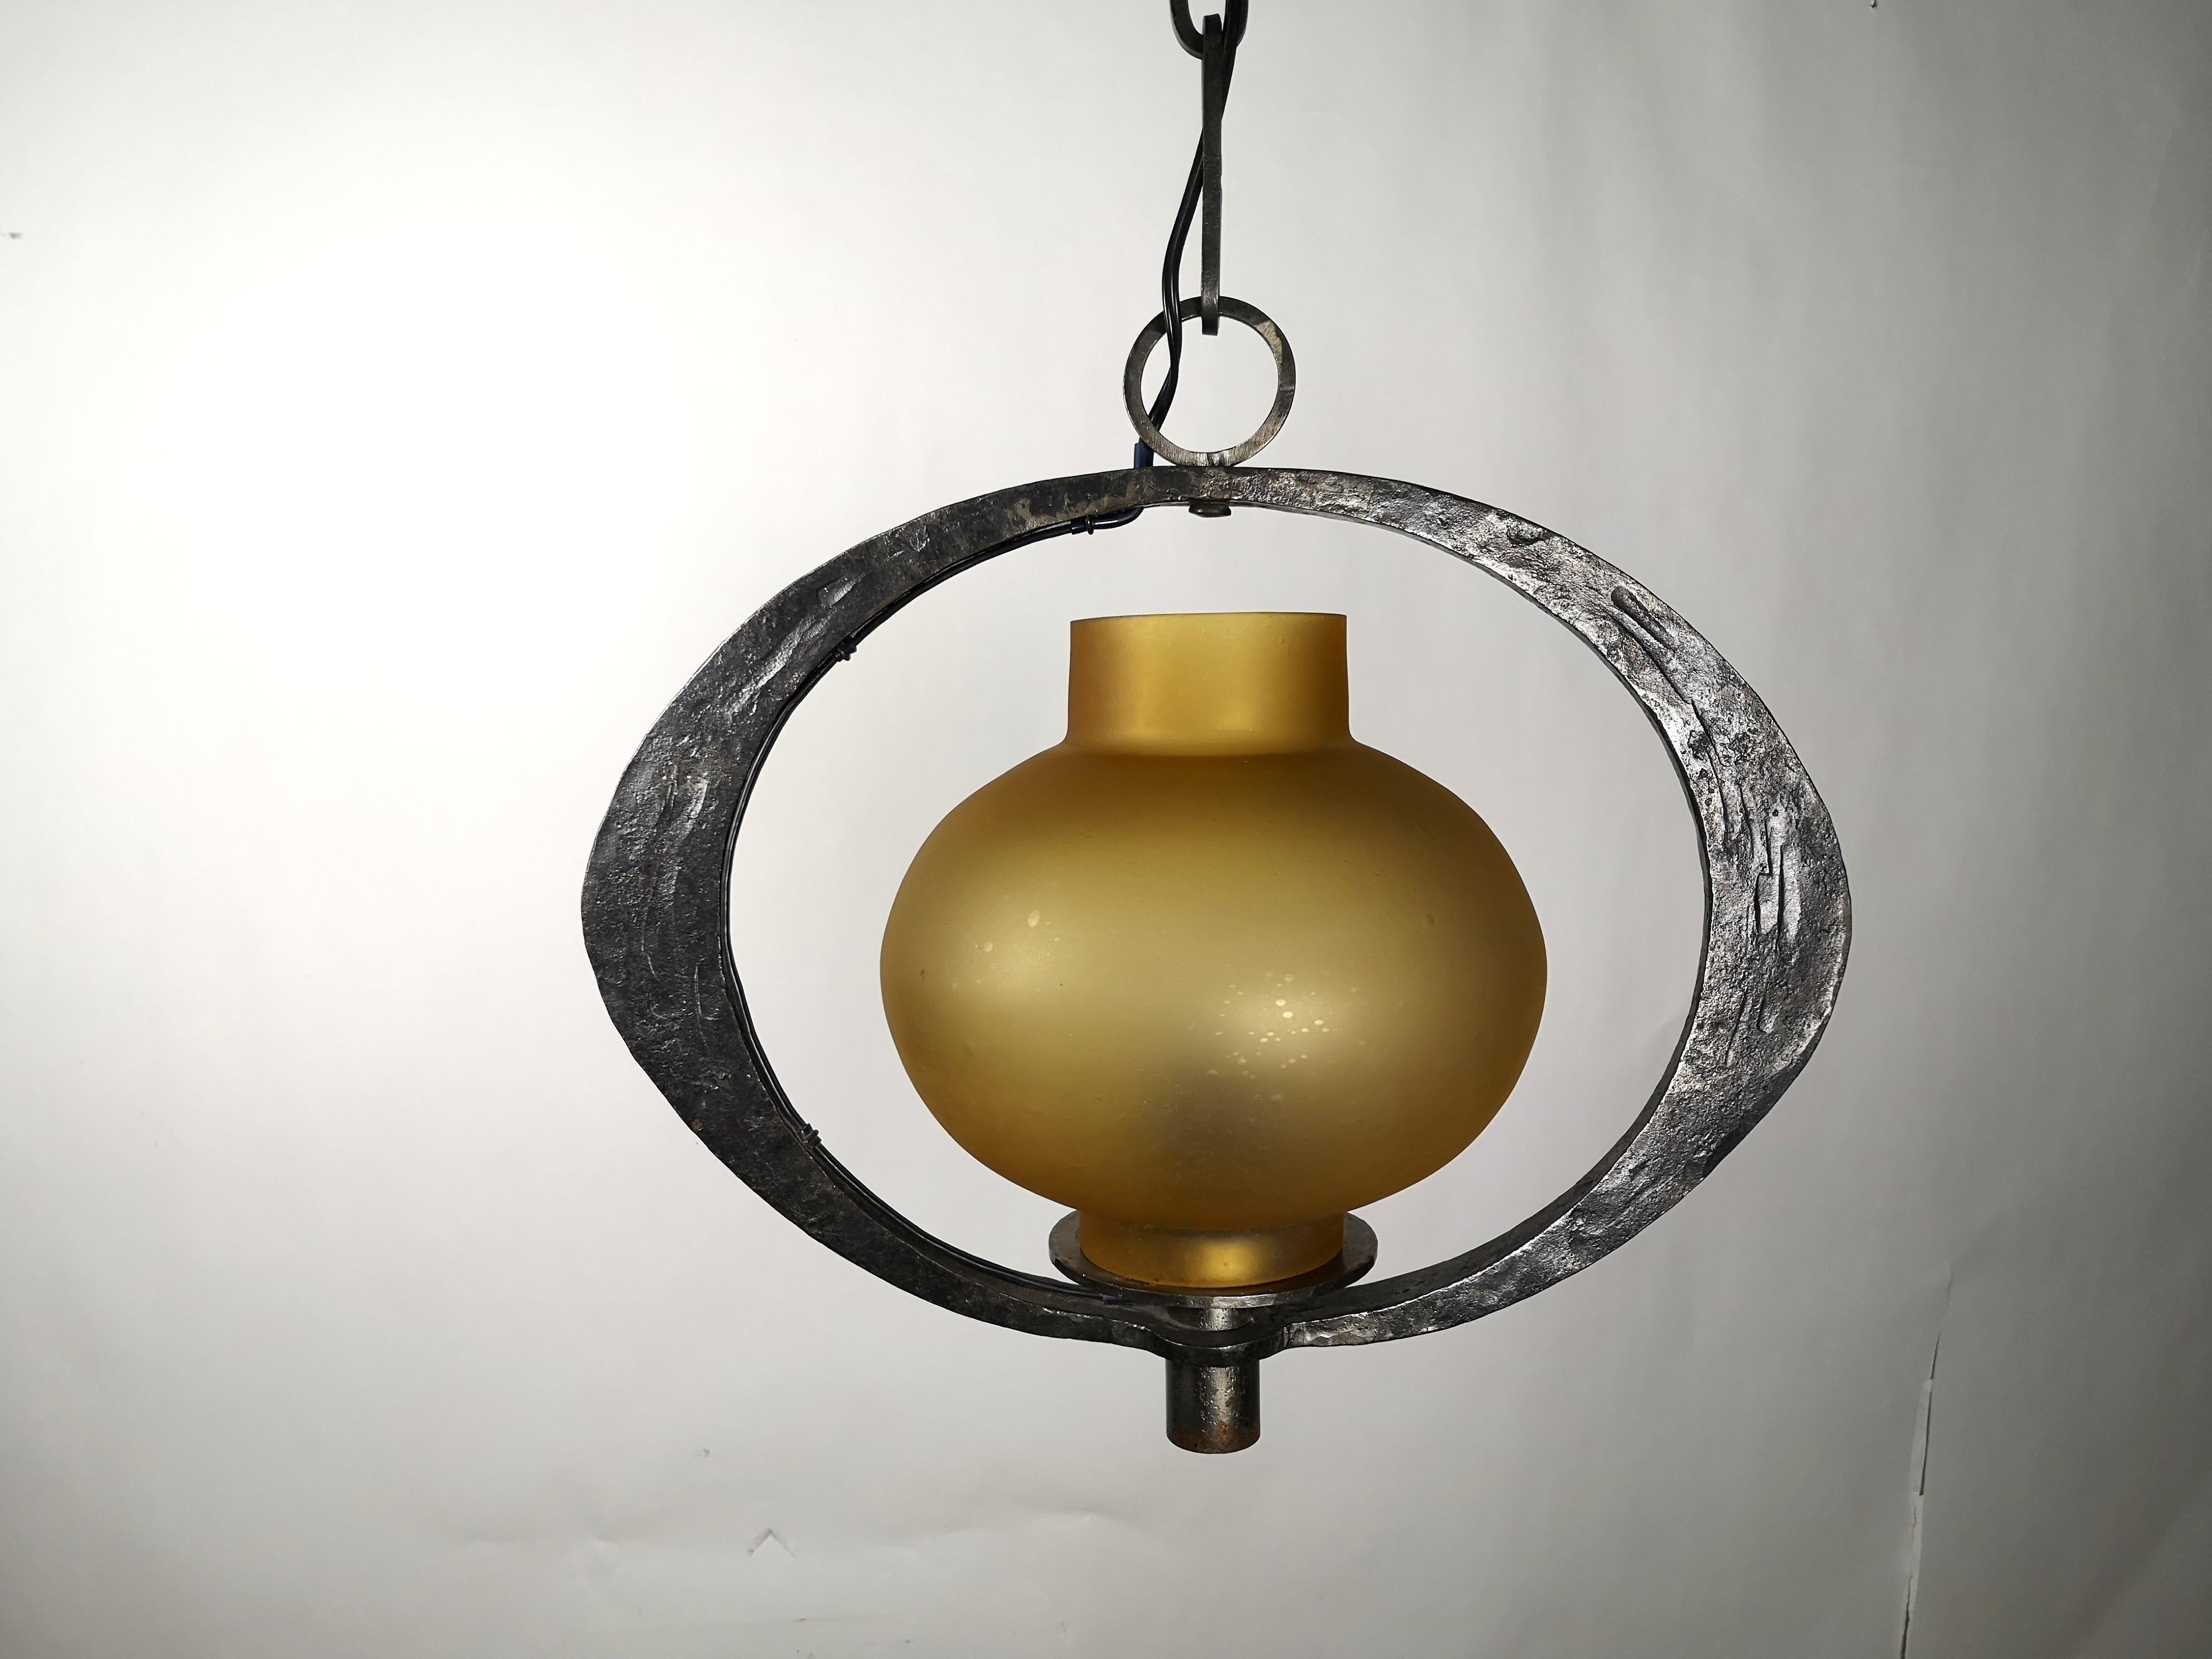 Handmade Hungarian wrought iron chandelier with unique glass bulb, 1970s, signed by artist Janos Lehoczky.